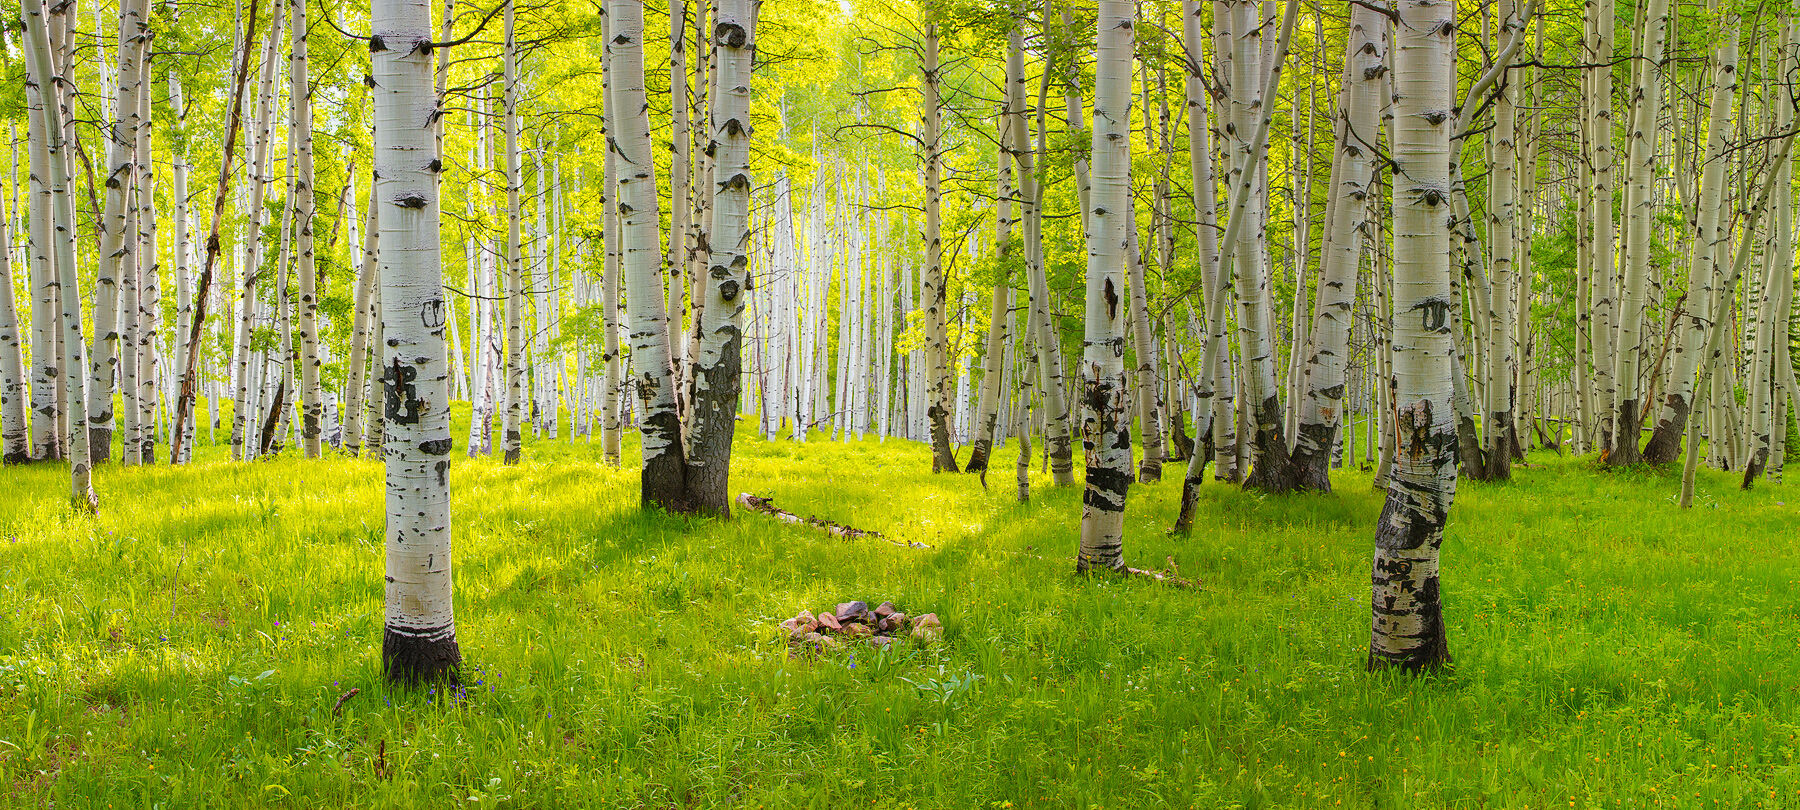 An aspen grove is seen with bright green grass on the forest floor and white aspen tree trunks throughout the scene.